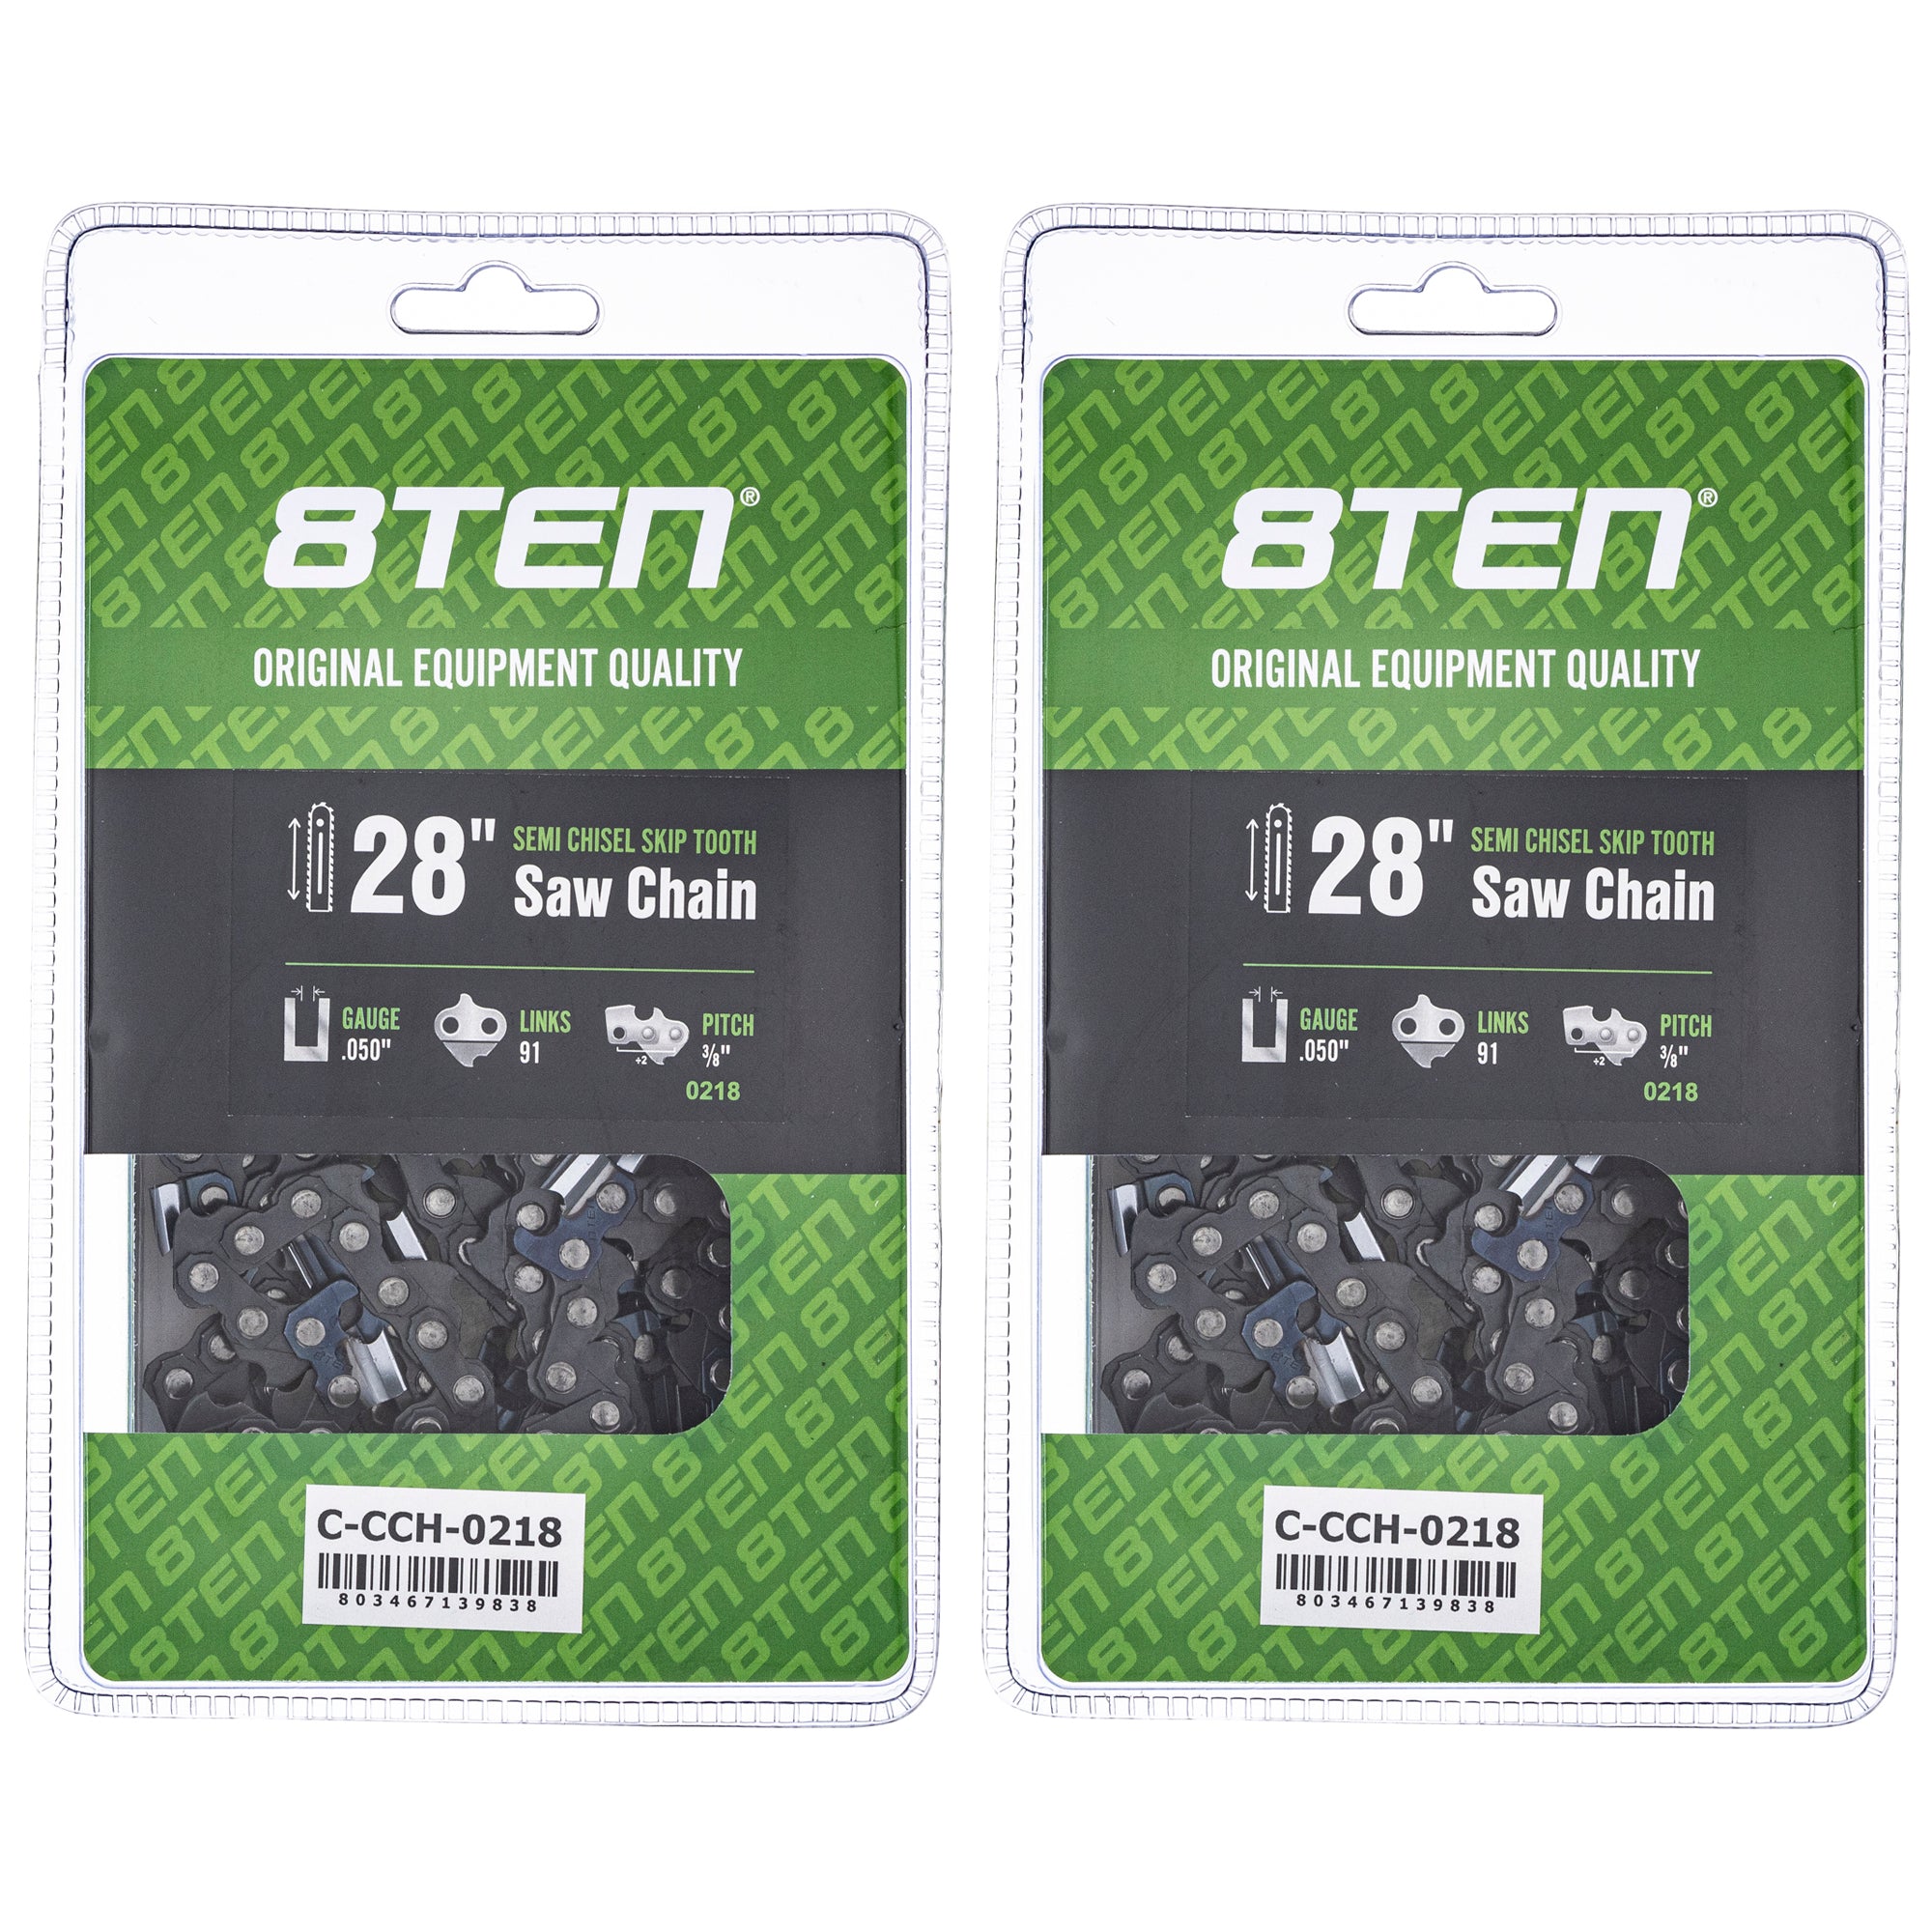 Chainsaw Chain 28 Inch .050 3/8 91DL 2-Pack for zOTHER Oregon MS 066 064 056 8TEN 810-CCC2430H